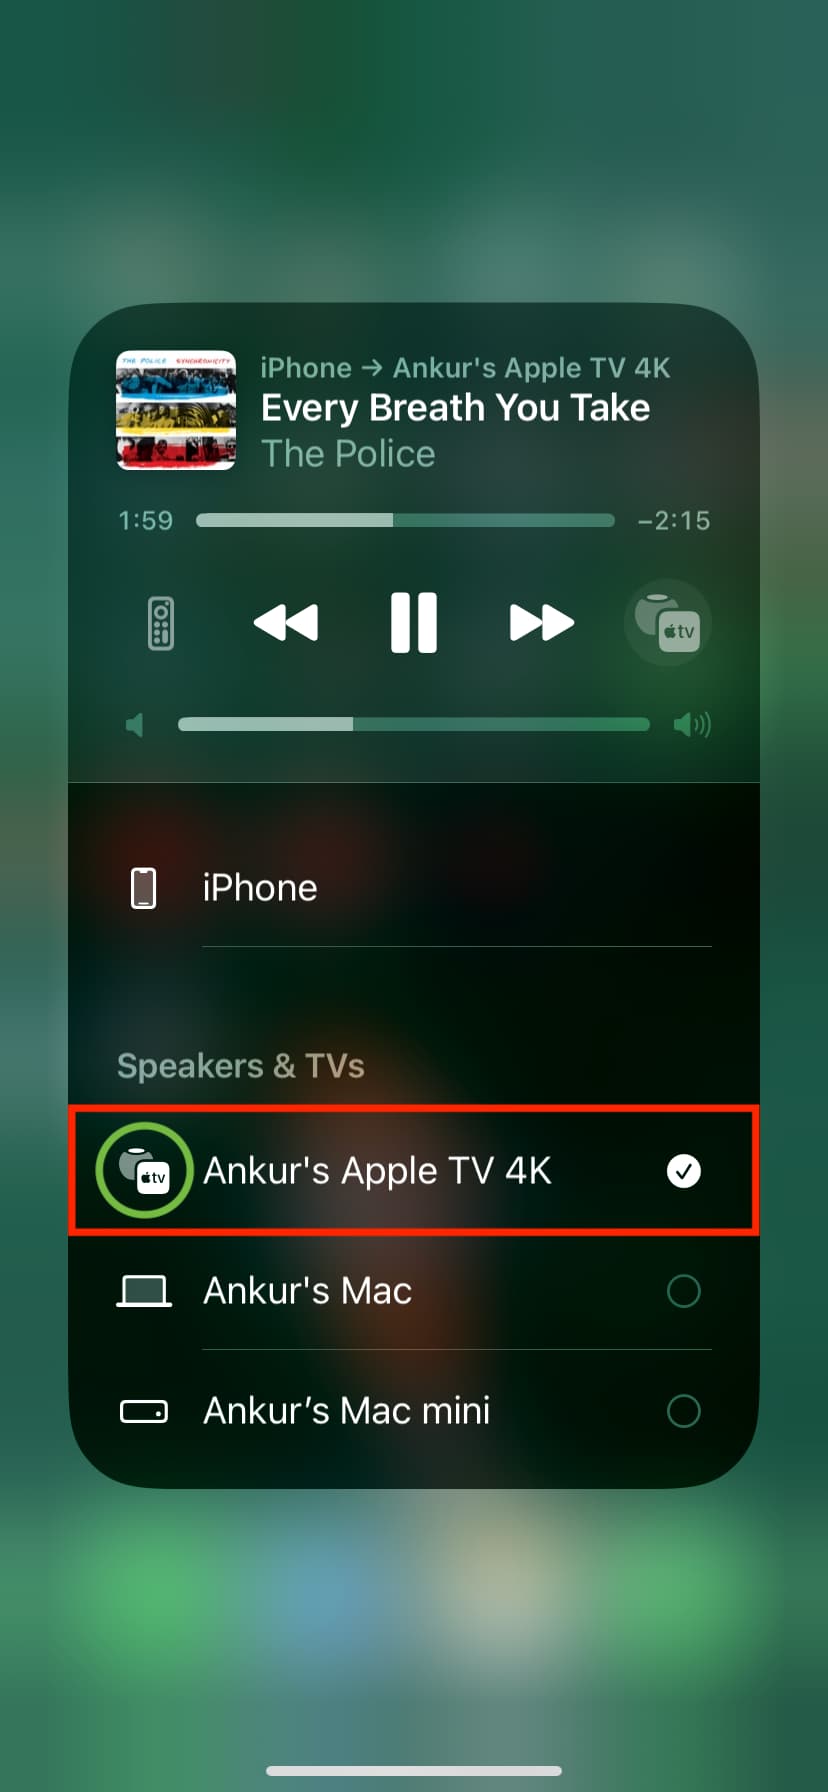 Apple TV name with tiny HomePod and TV icon